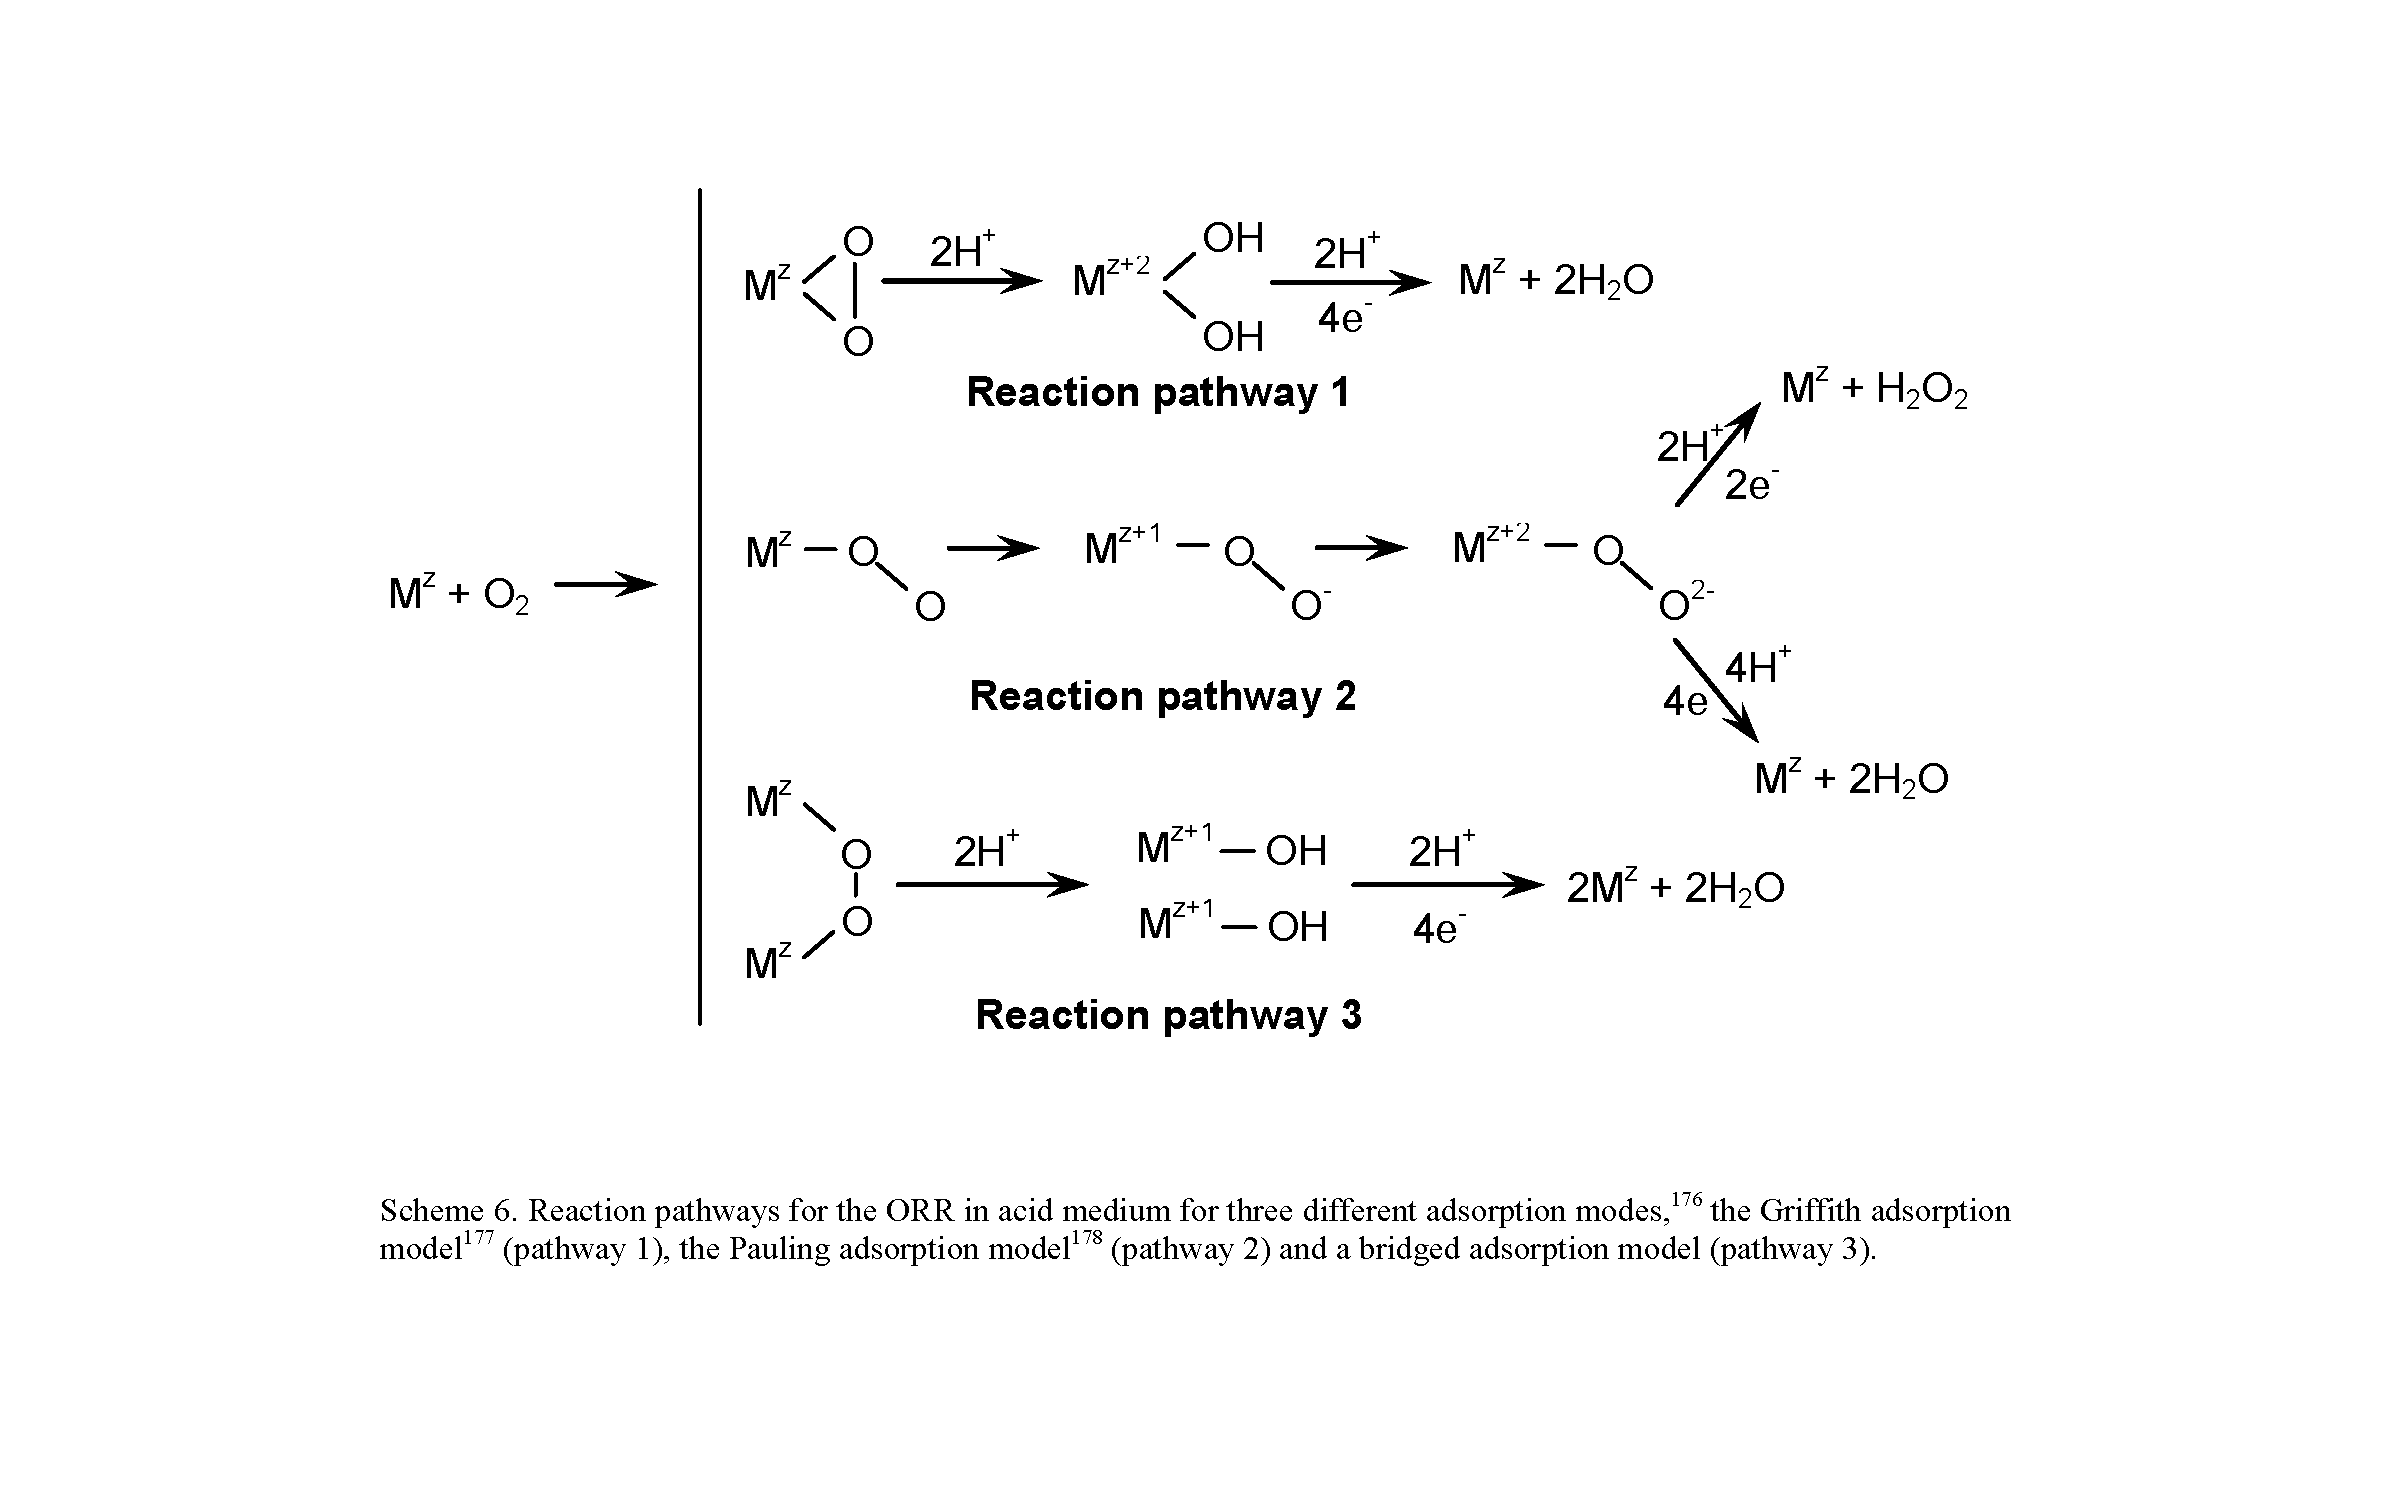 Scheme 6. Reaction pathways for the ORR in acid medium for three different adsorption modes, the Griffith adsorption model (pathway 1), the Pauling adsorption model (pathway 2) and a bridged adsorption model (pathway 3).